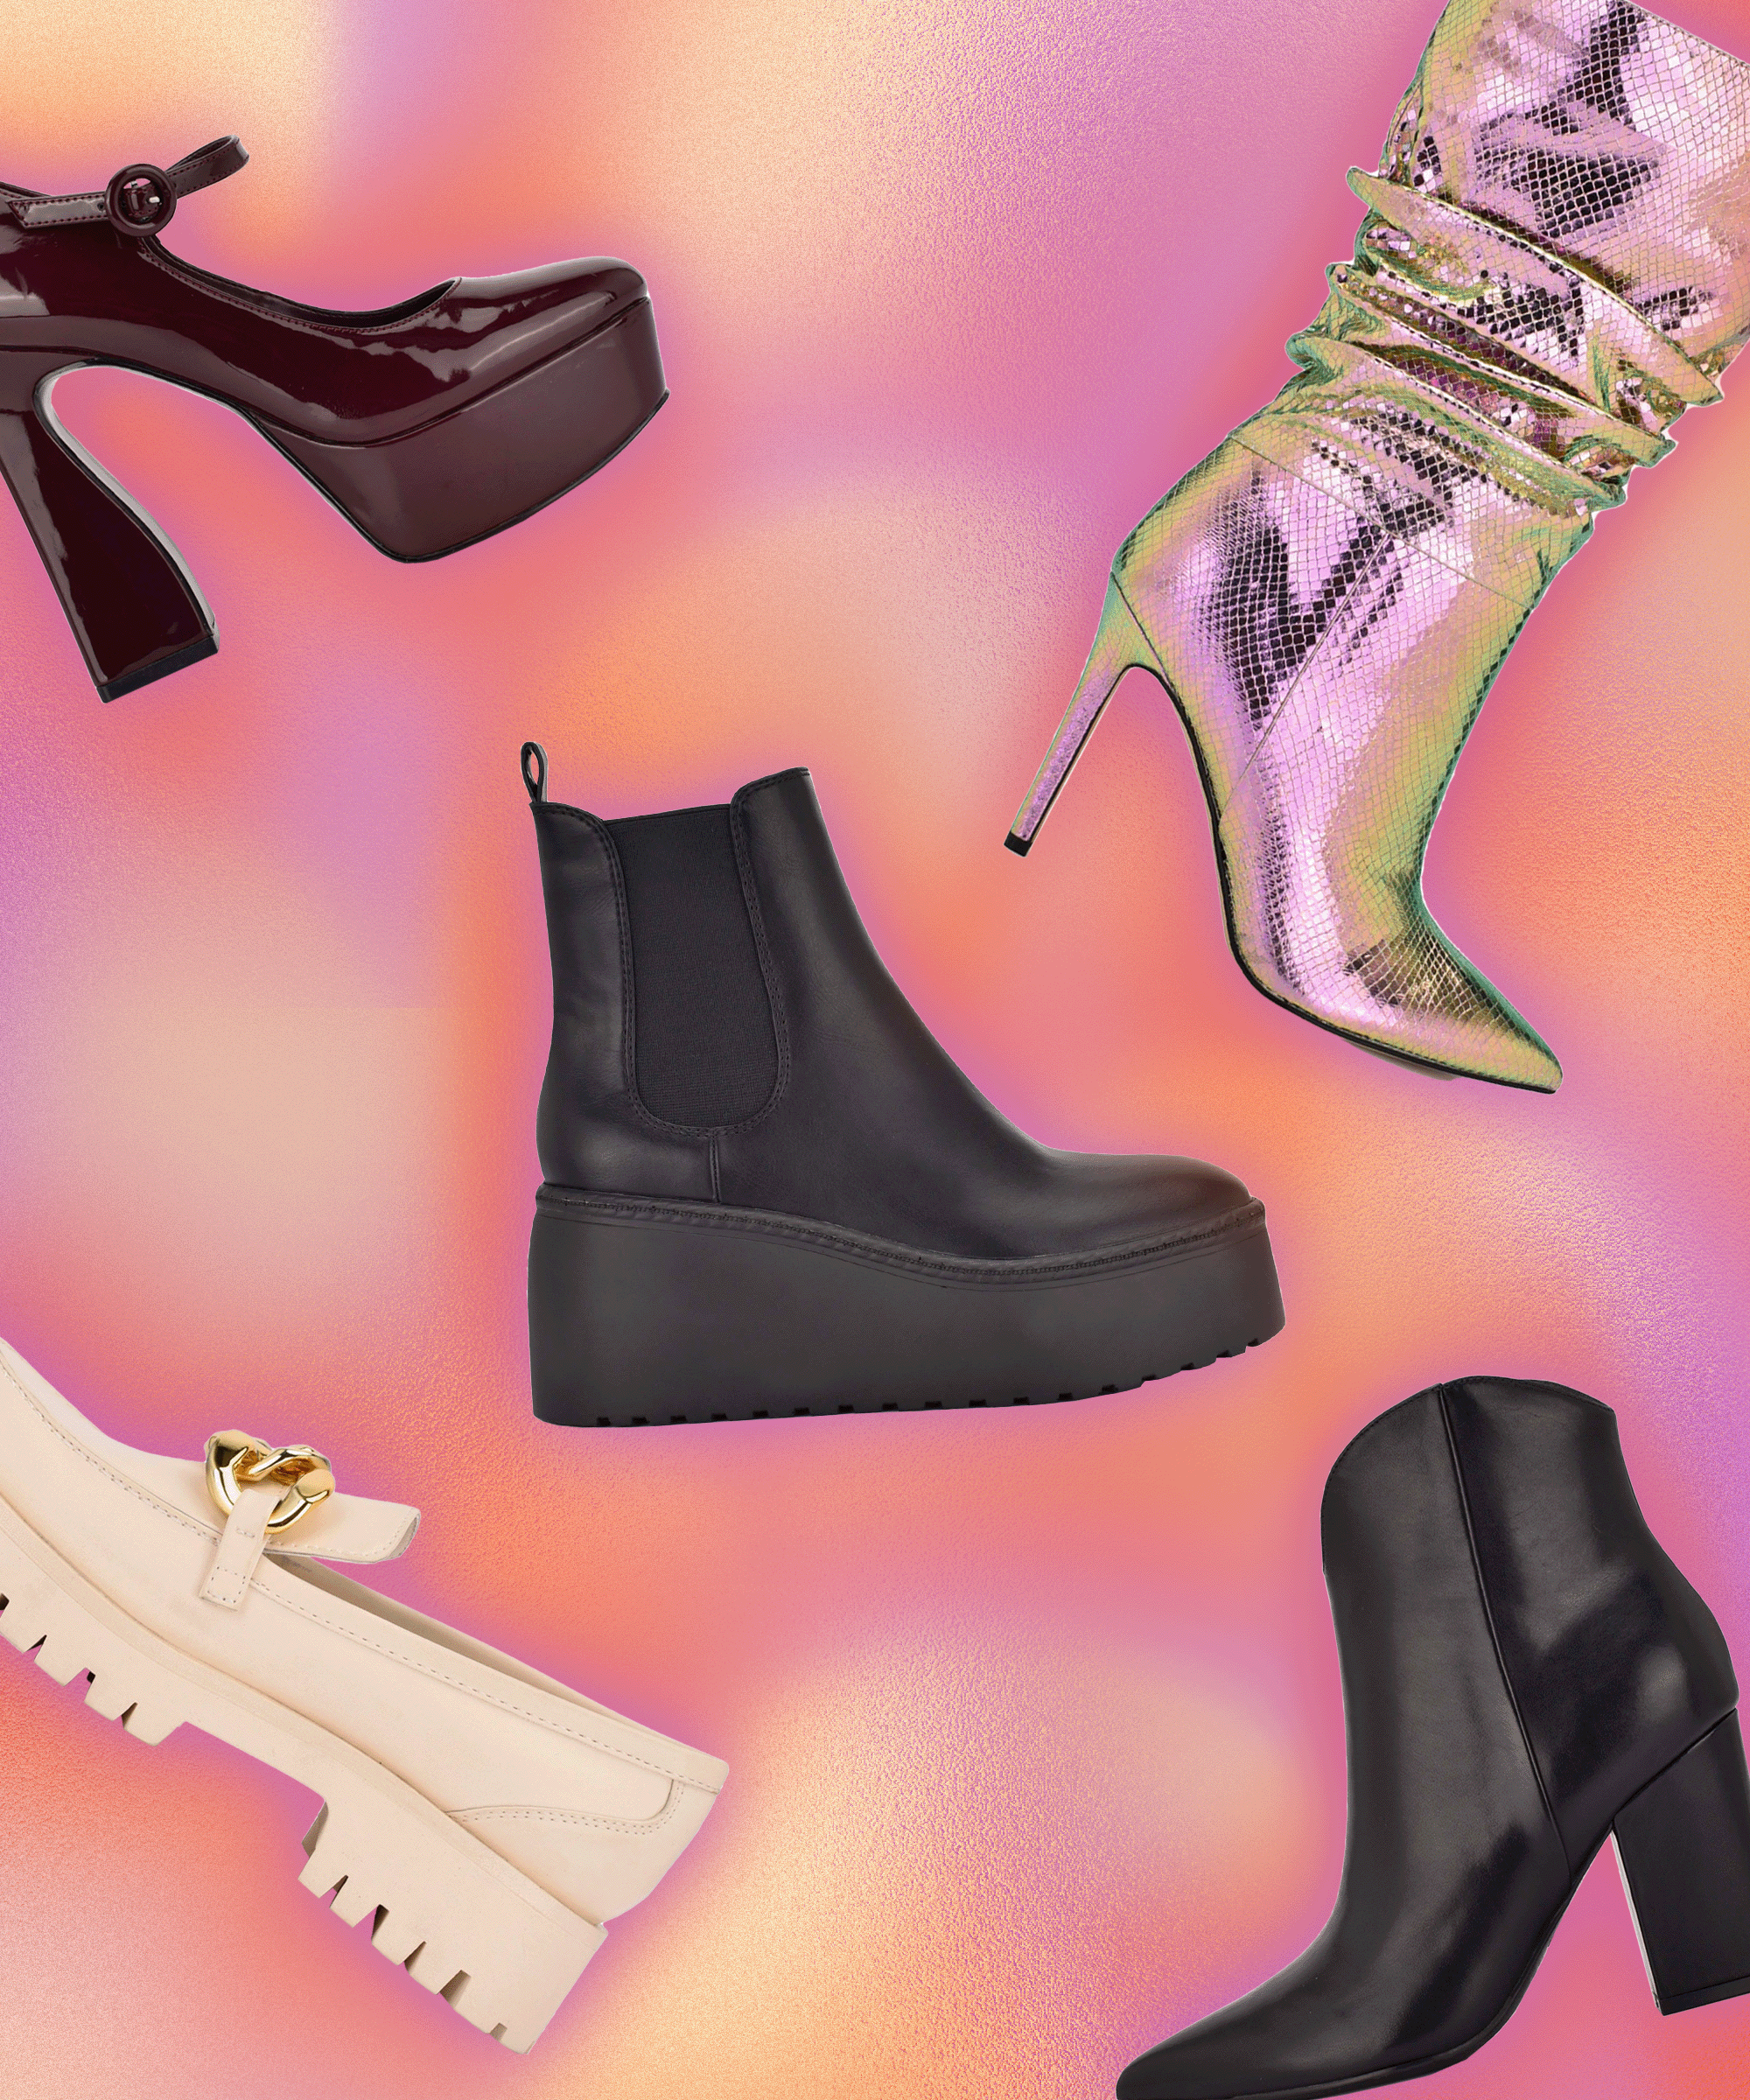 Shoe trends 2022: Must-have styles to invest in this season